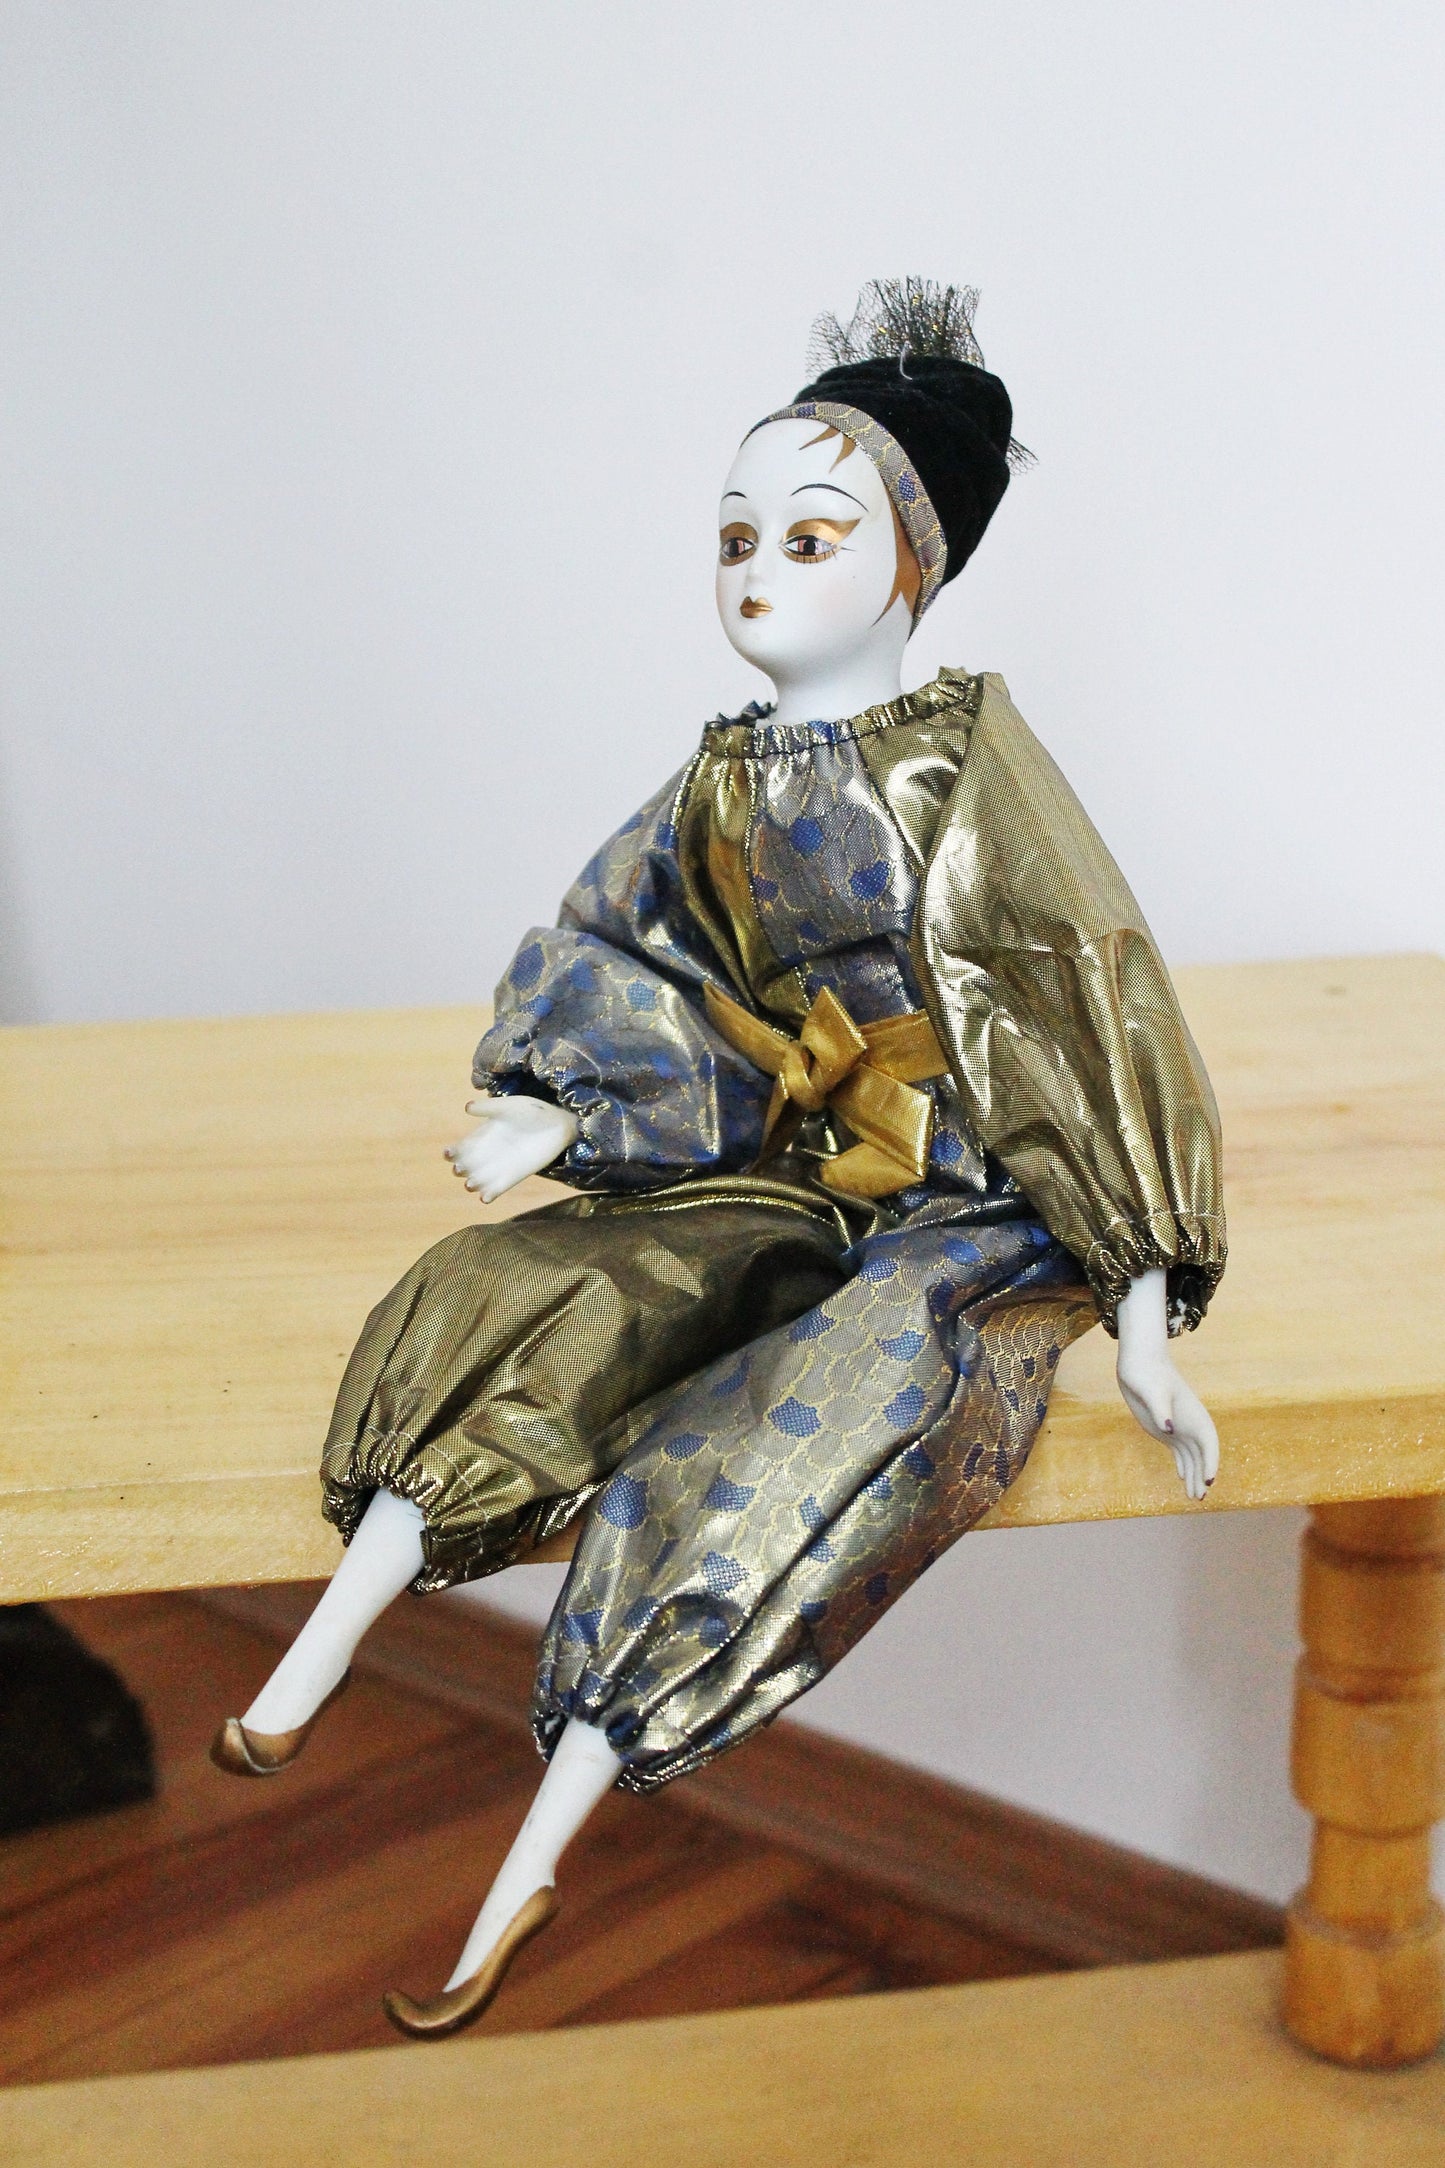 Vintage porcelain Venetian doll - Harlequin1 - 16 inches- collectible doll - porcelain doll - decor doll - 1980s